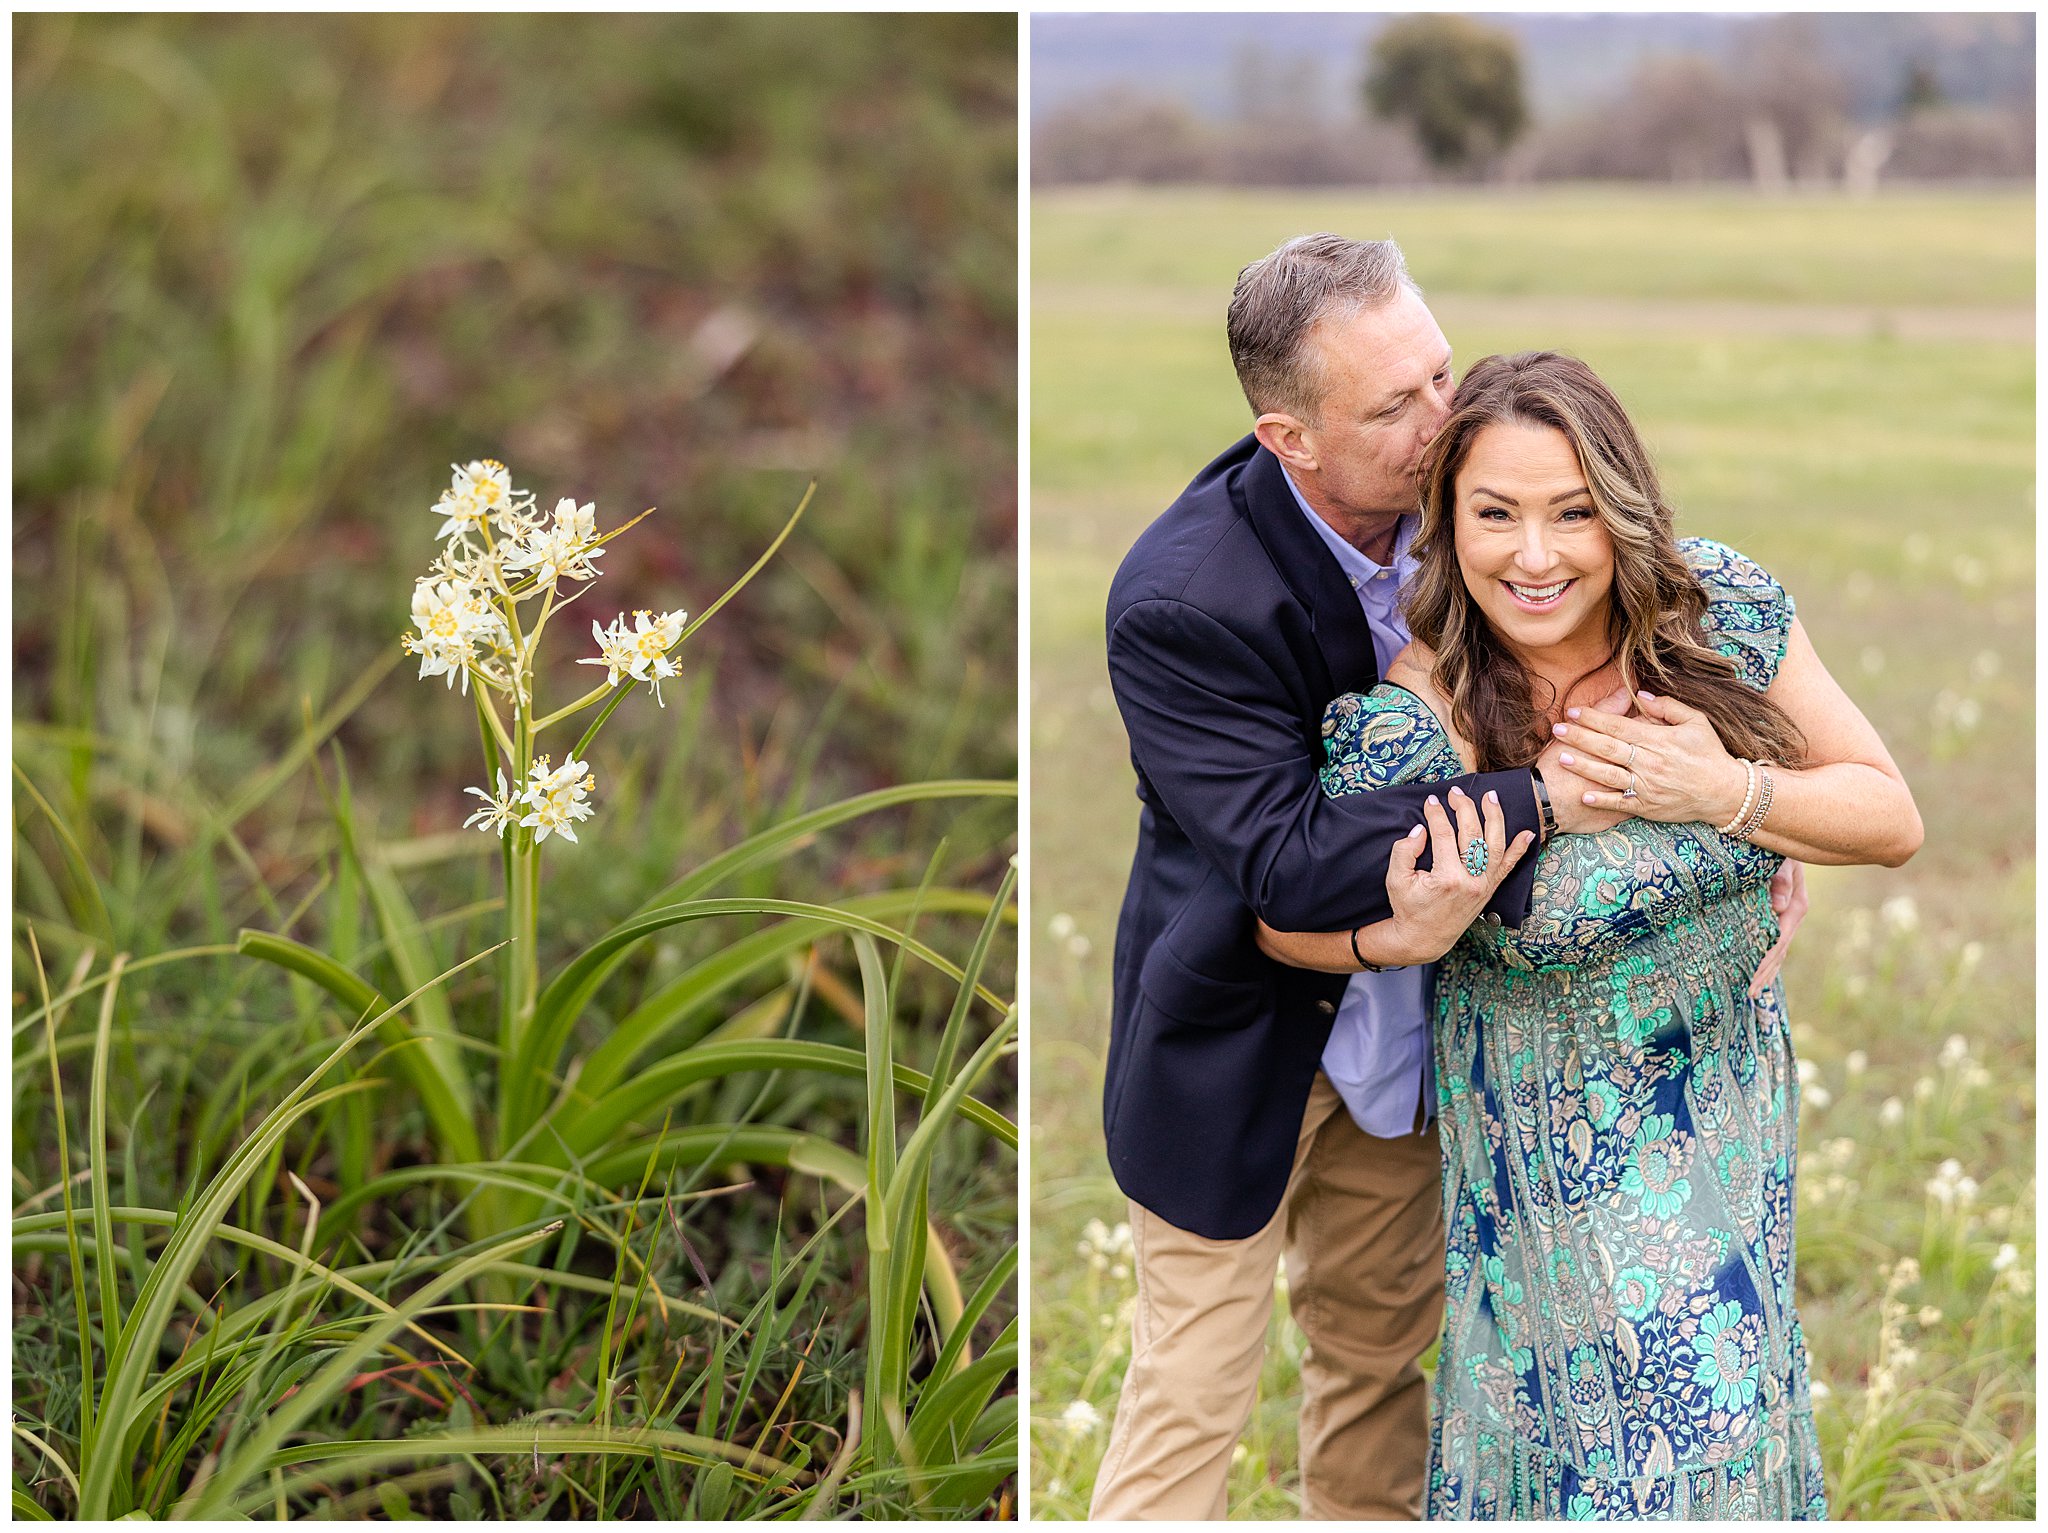 Upper Bidwell Park Engagement Session Chico CA Trail Wildflowers Champagne,